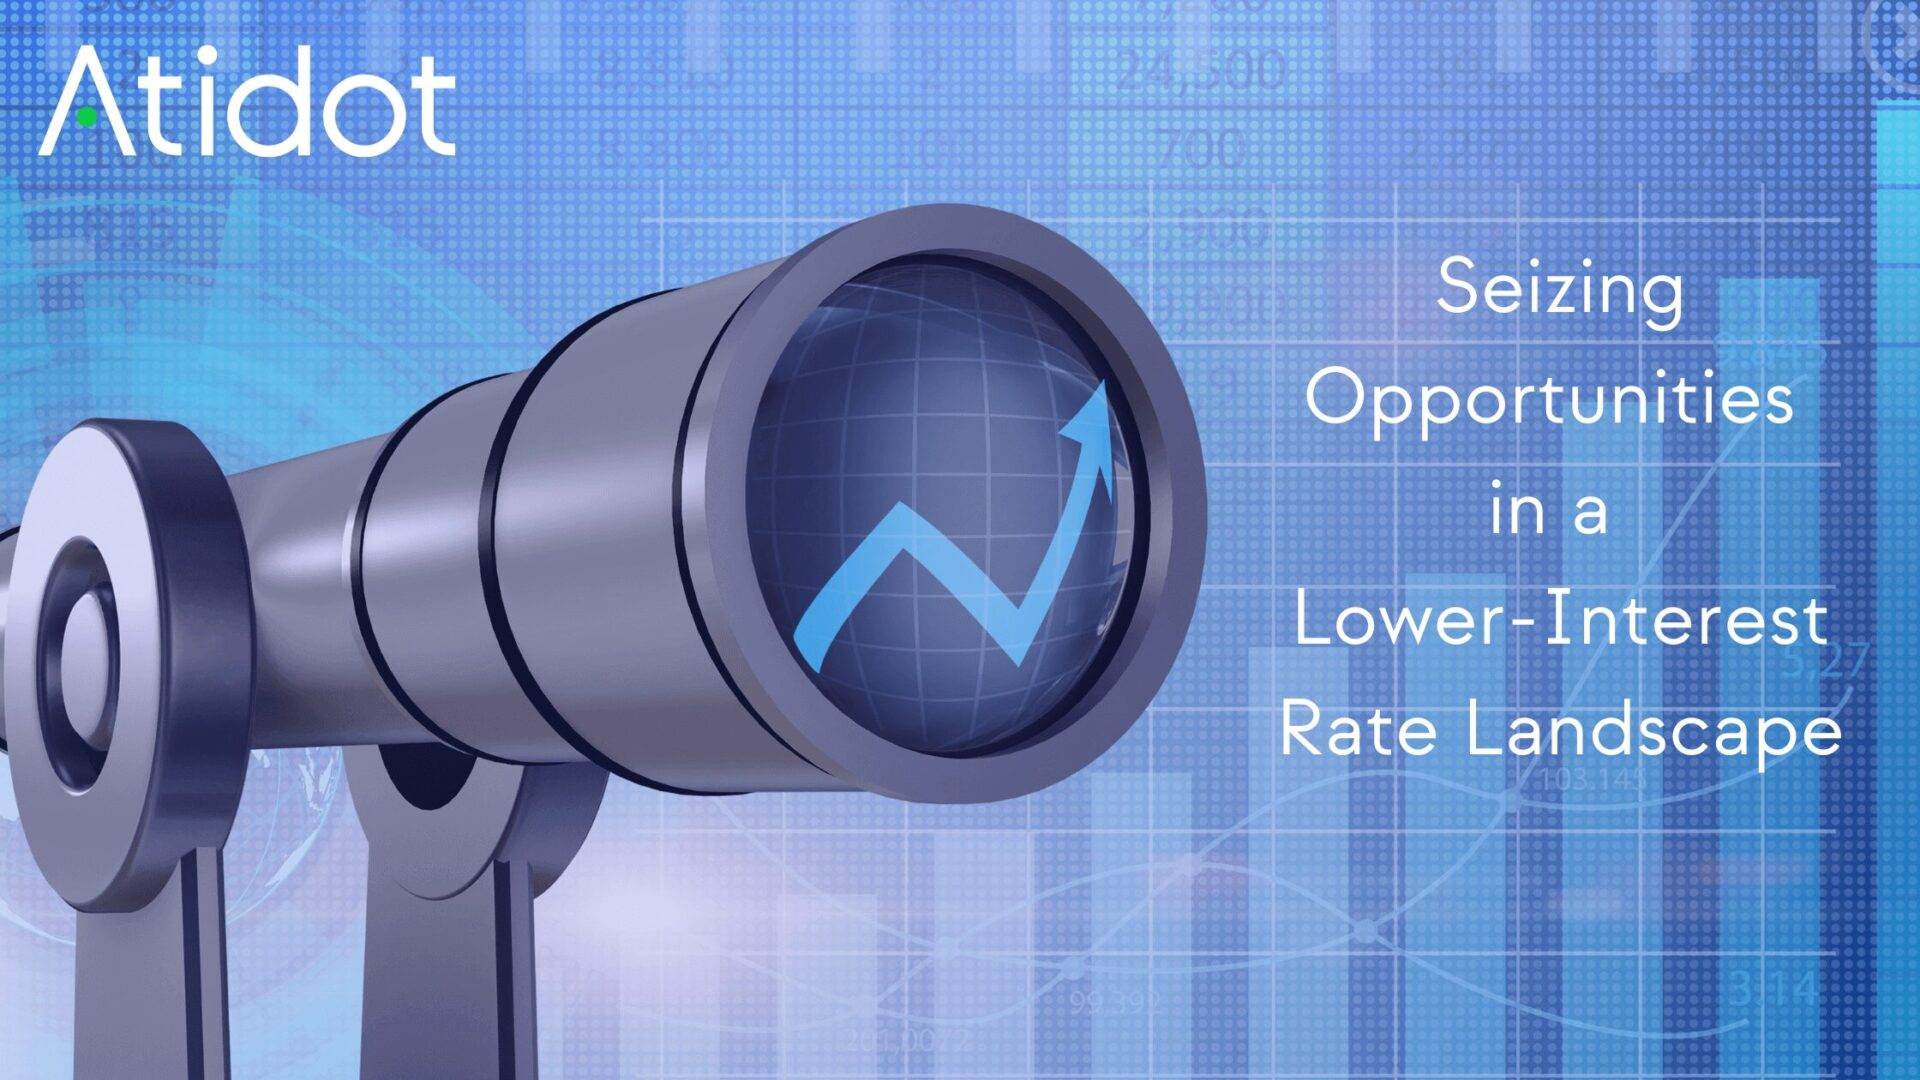 Seizing Opportunities in a Lower-Interest Rate Landscape: A Strategic Guide for Life Insurance & Annuity Companies